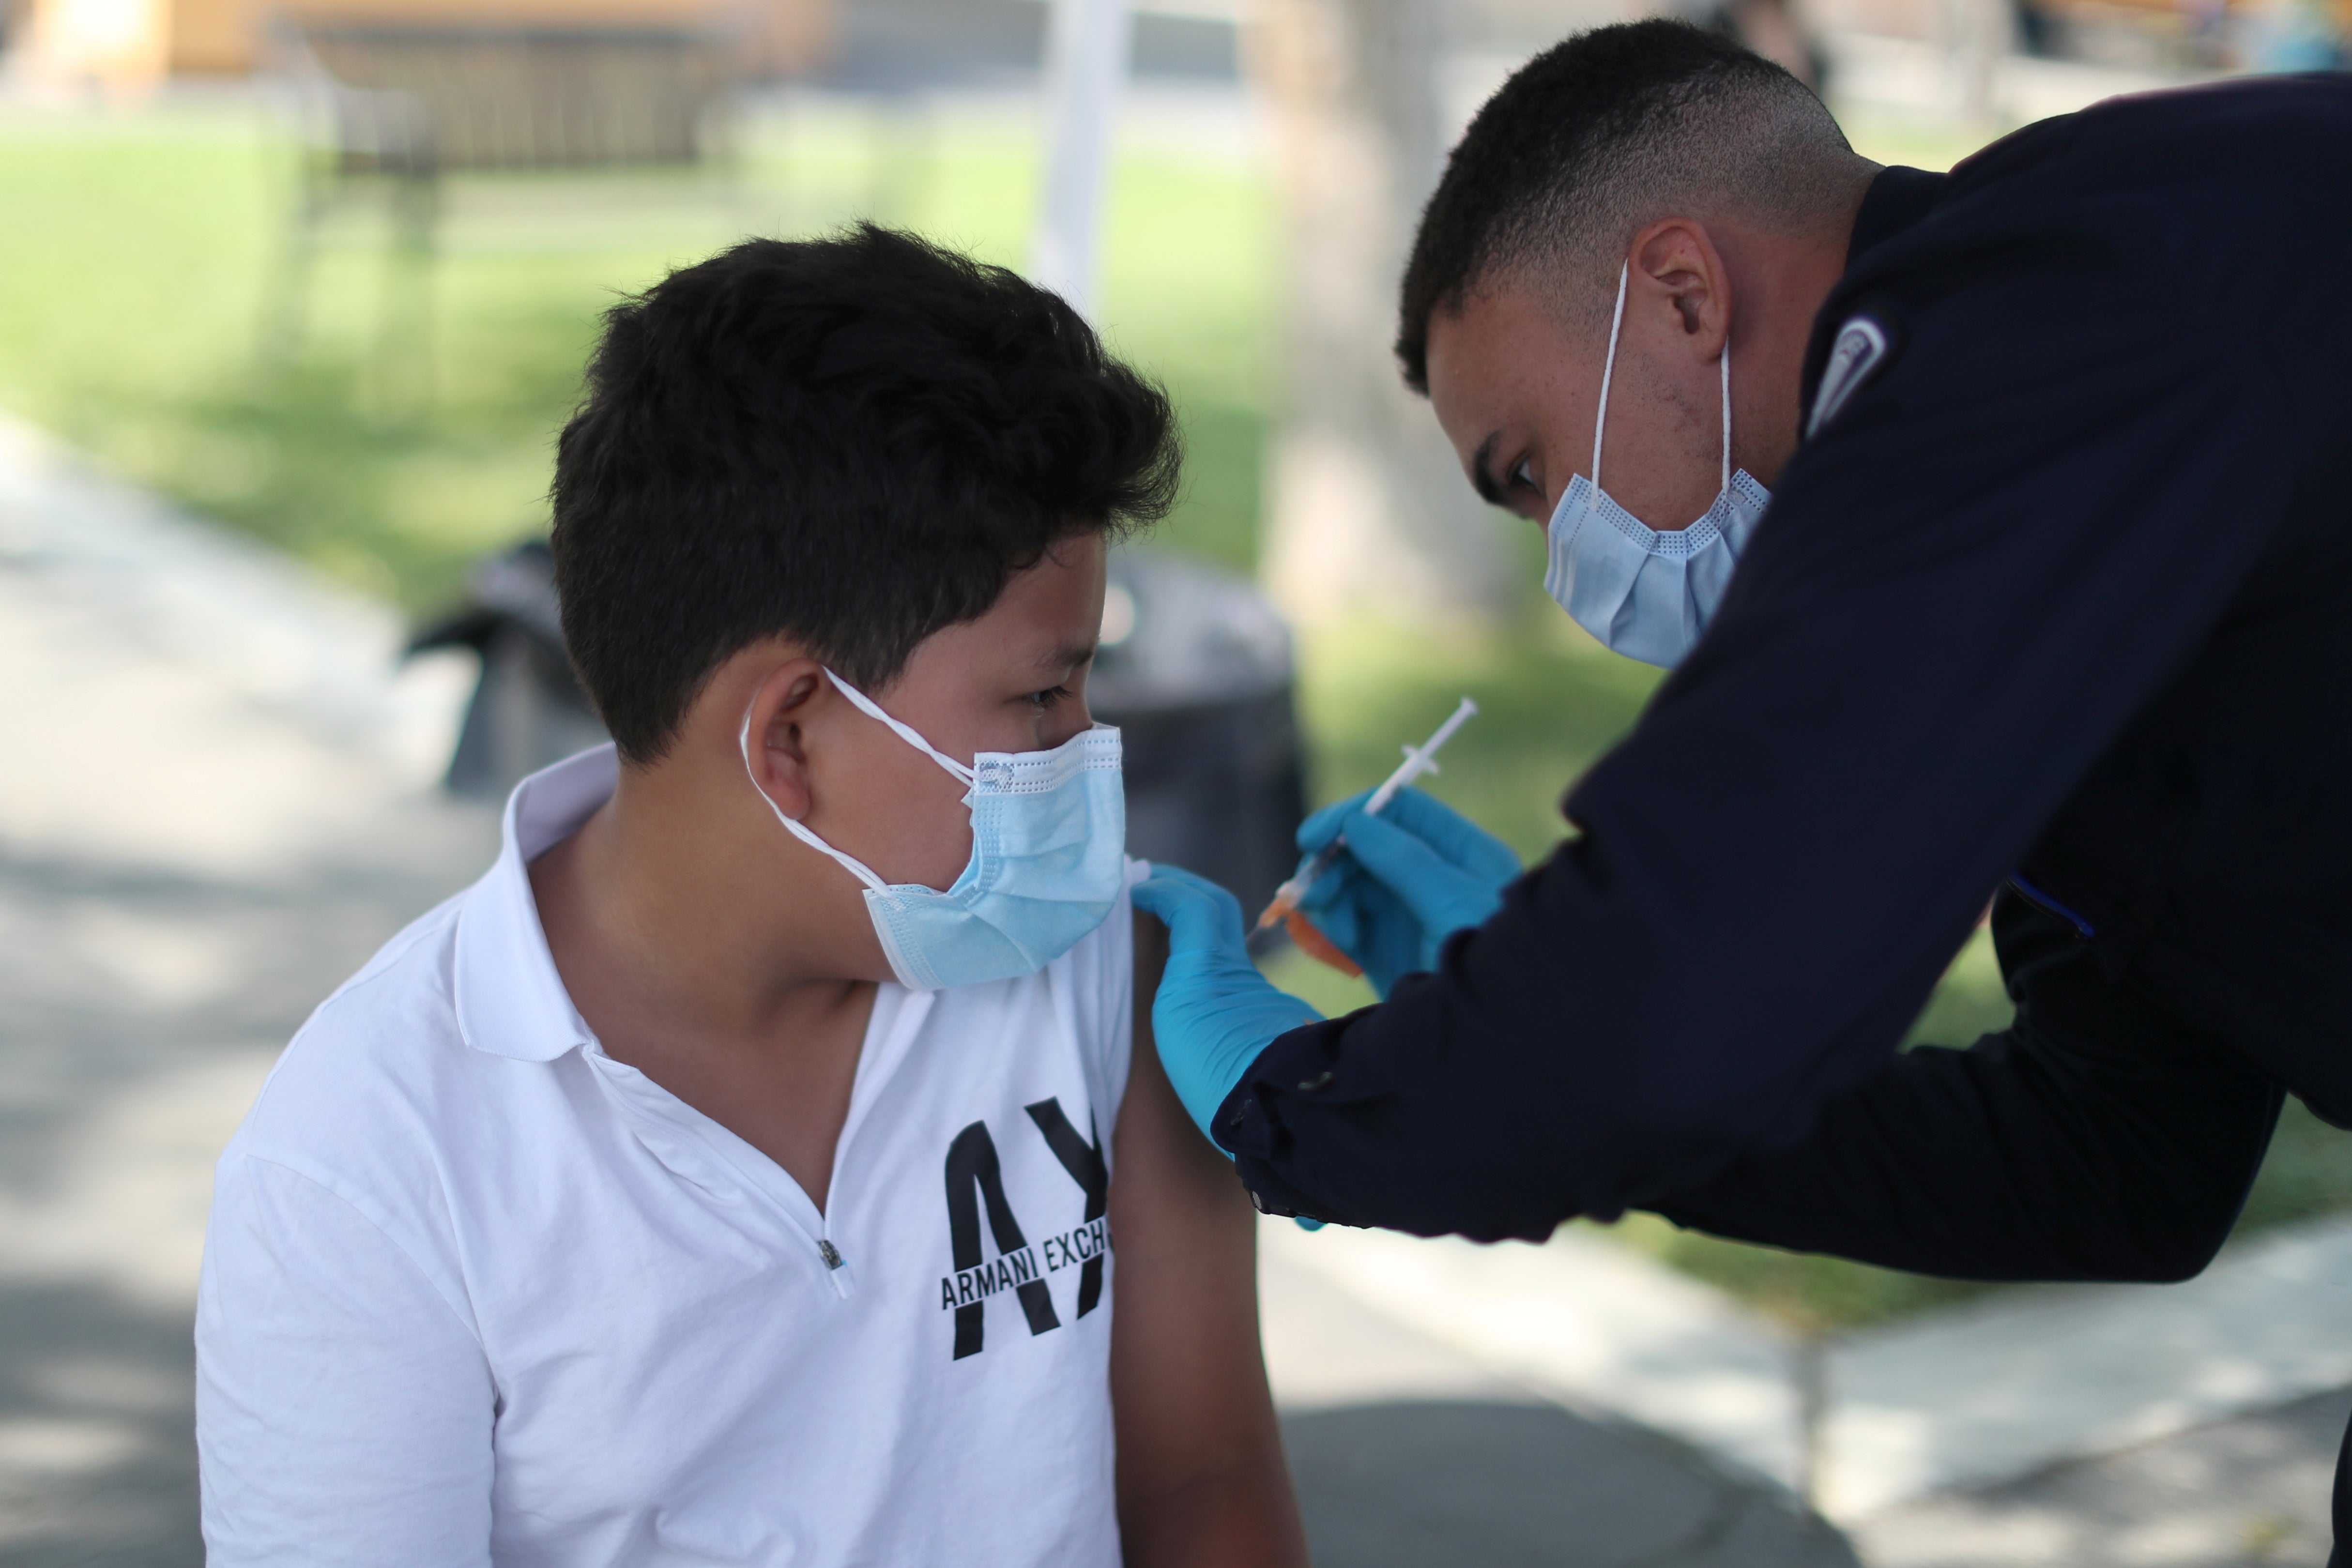 A 12-year-old receives first dose of Covid-19 vaccine in Los Angeles